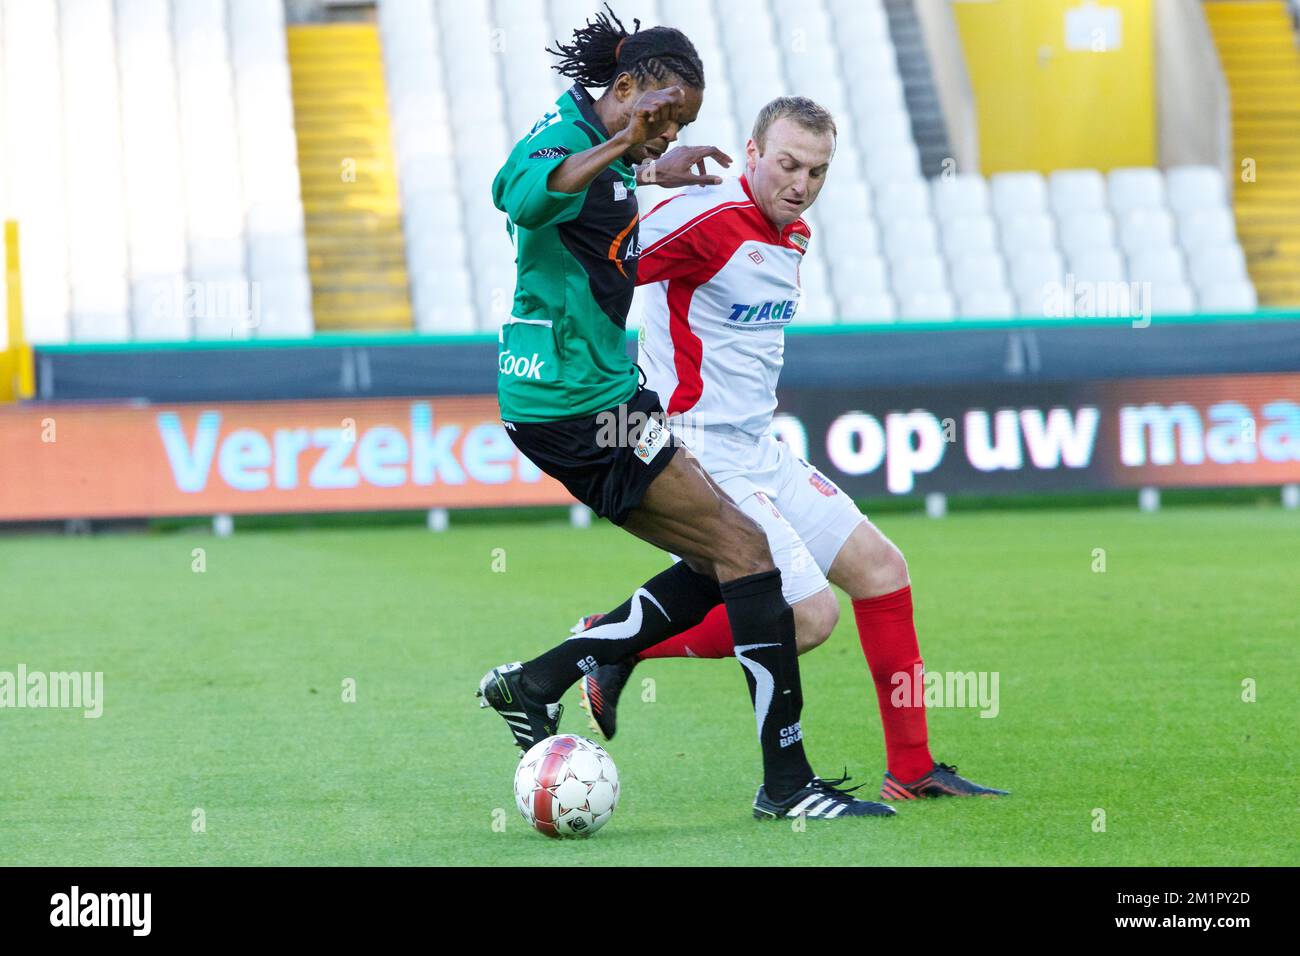 Cercle's Michael Uchebo fights for the ball during the match between Cercle Brugge and Mouscron-Peruwelz, in Brugge, Thursday 23 May 2013, on the fifth day of the final round in the second division league of the Belgian soccer championship. BELGA PHOTO KURT DESPLENTER Stock Photo